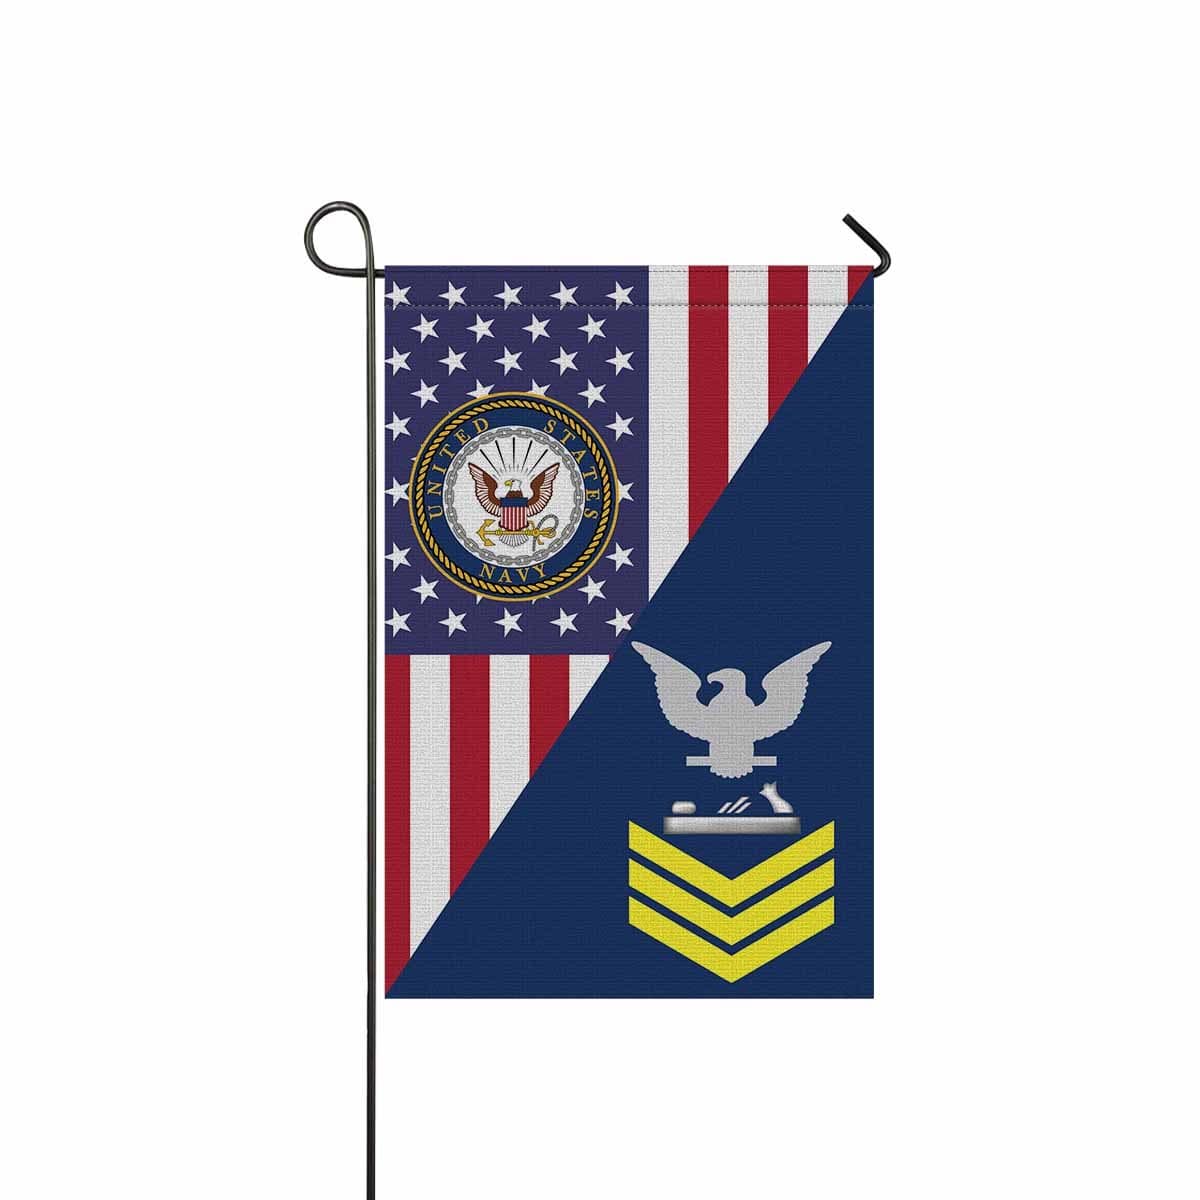 Navy Patternmaker Navy PM E-6 Gold Stripe Garden Flag/Yard Flag 12 inches x 18 inches Twin-Side Printing-GDFlag-Navy-Rating-Veterans Nation